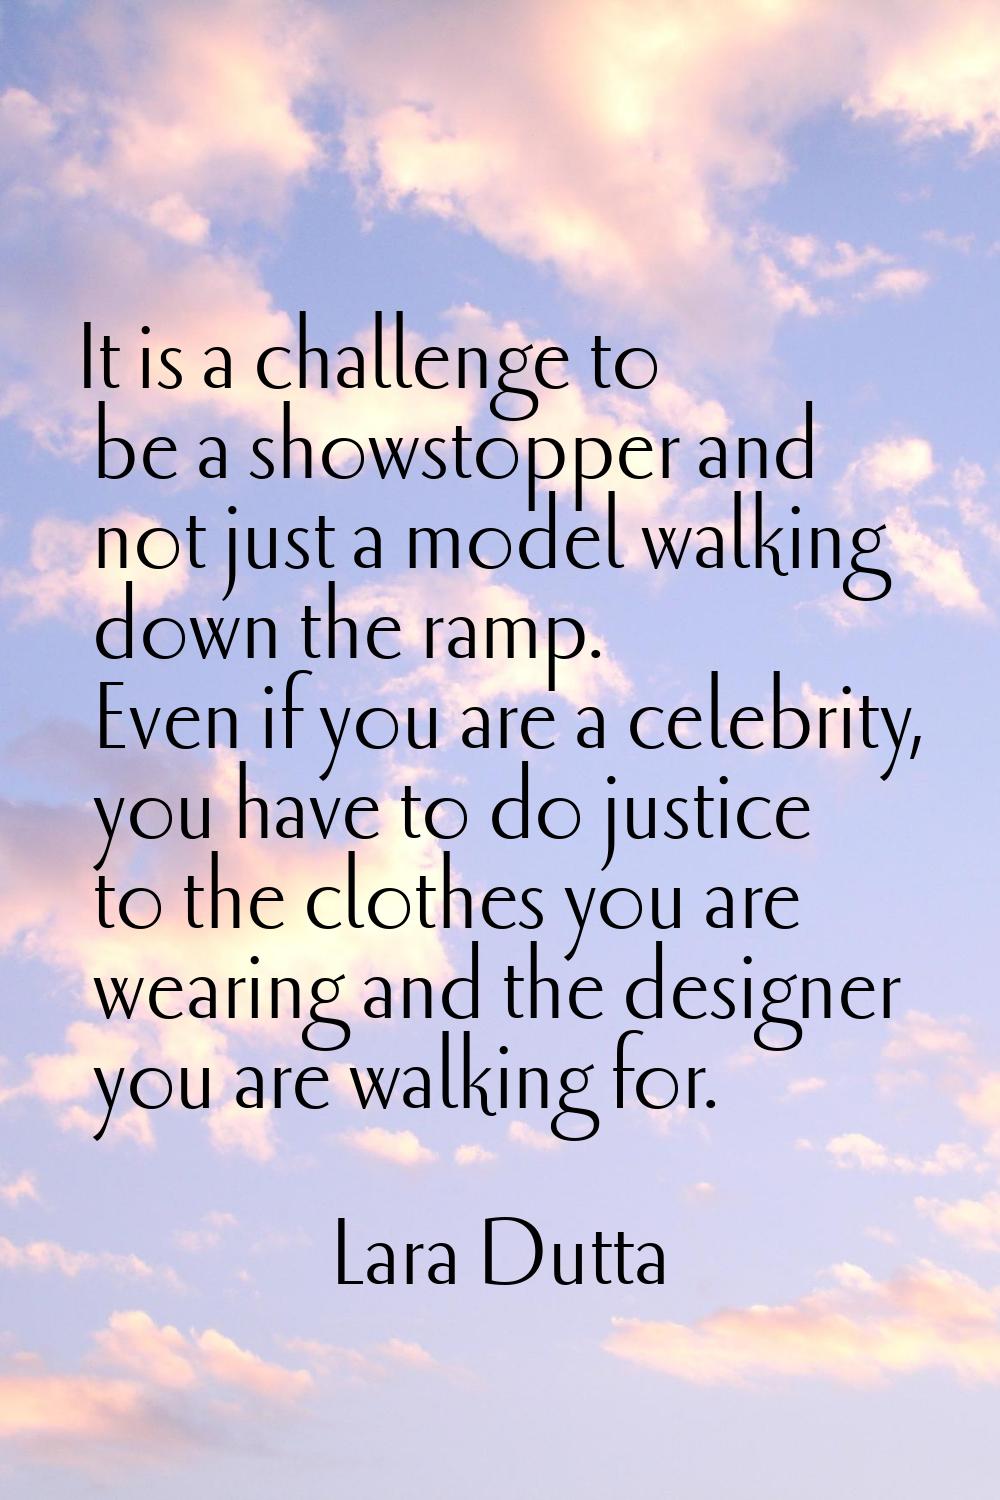 It is a challenge to be a showstopper and not just a model walking down the ramp. Even if you are a